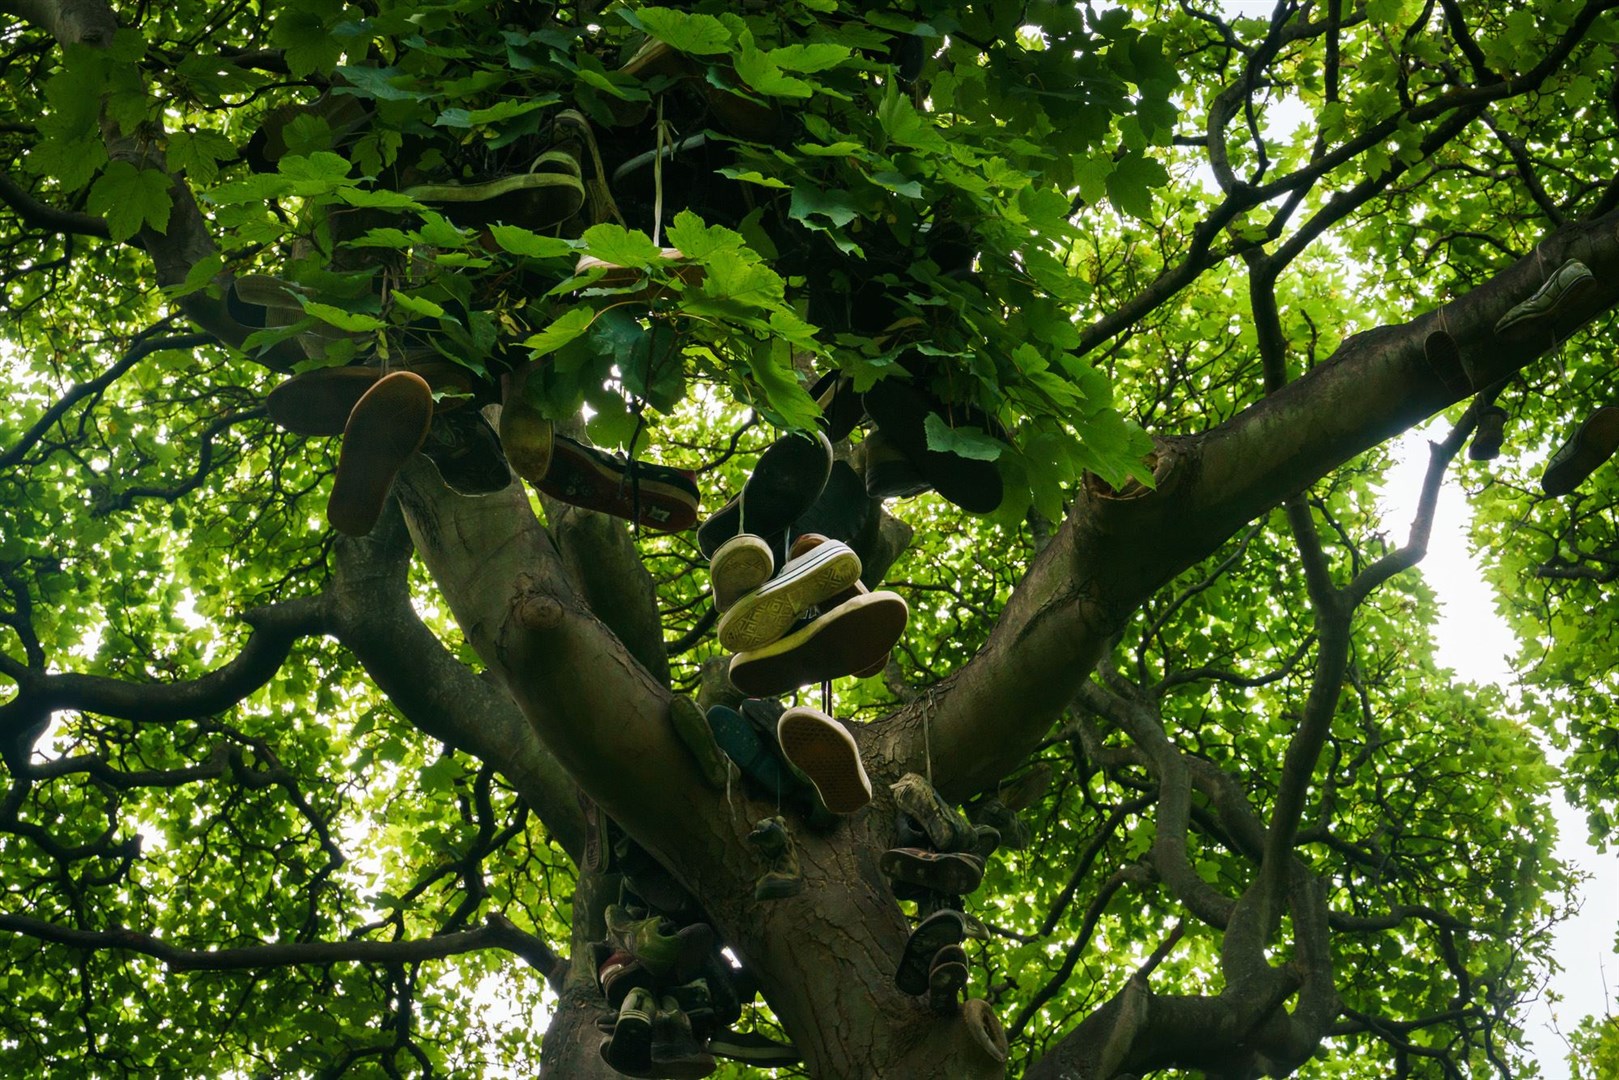 The Shoe Tree in Heaton Park, Newcastle, is among those shortlisted (Tessa Chan/Woodland Trust)